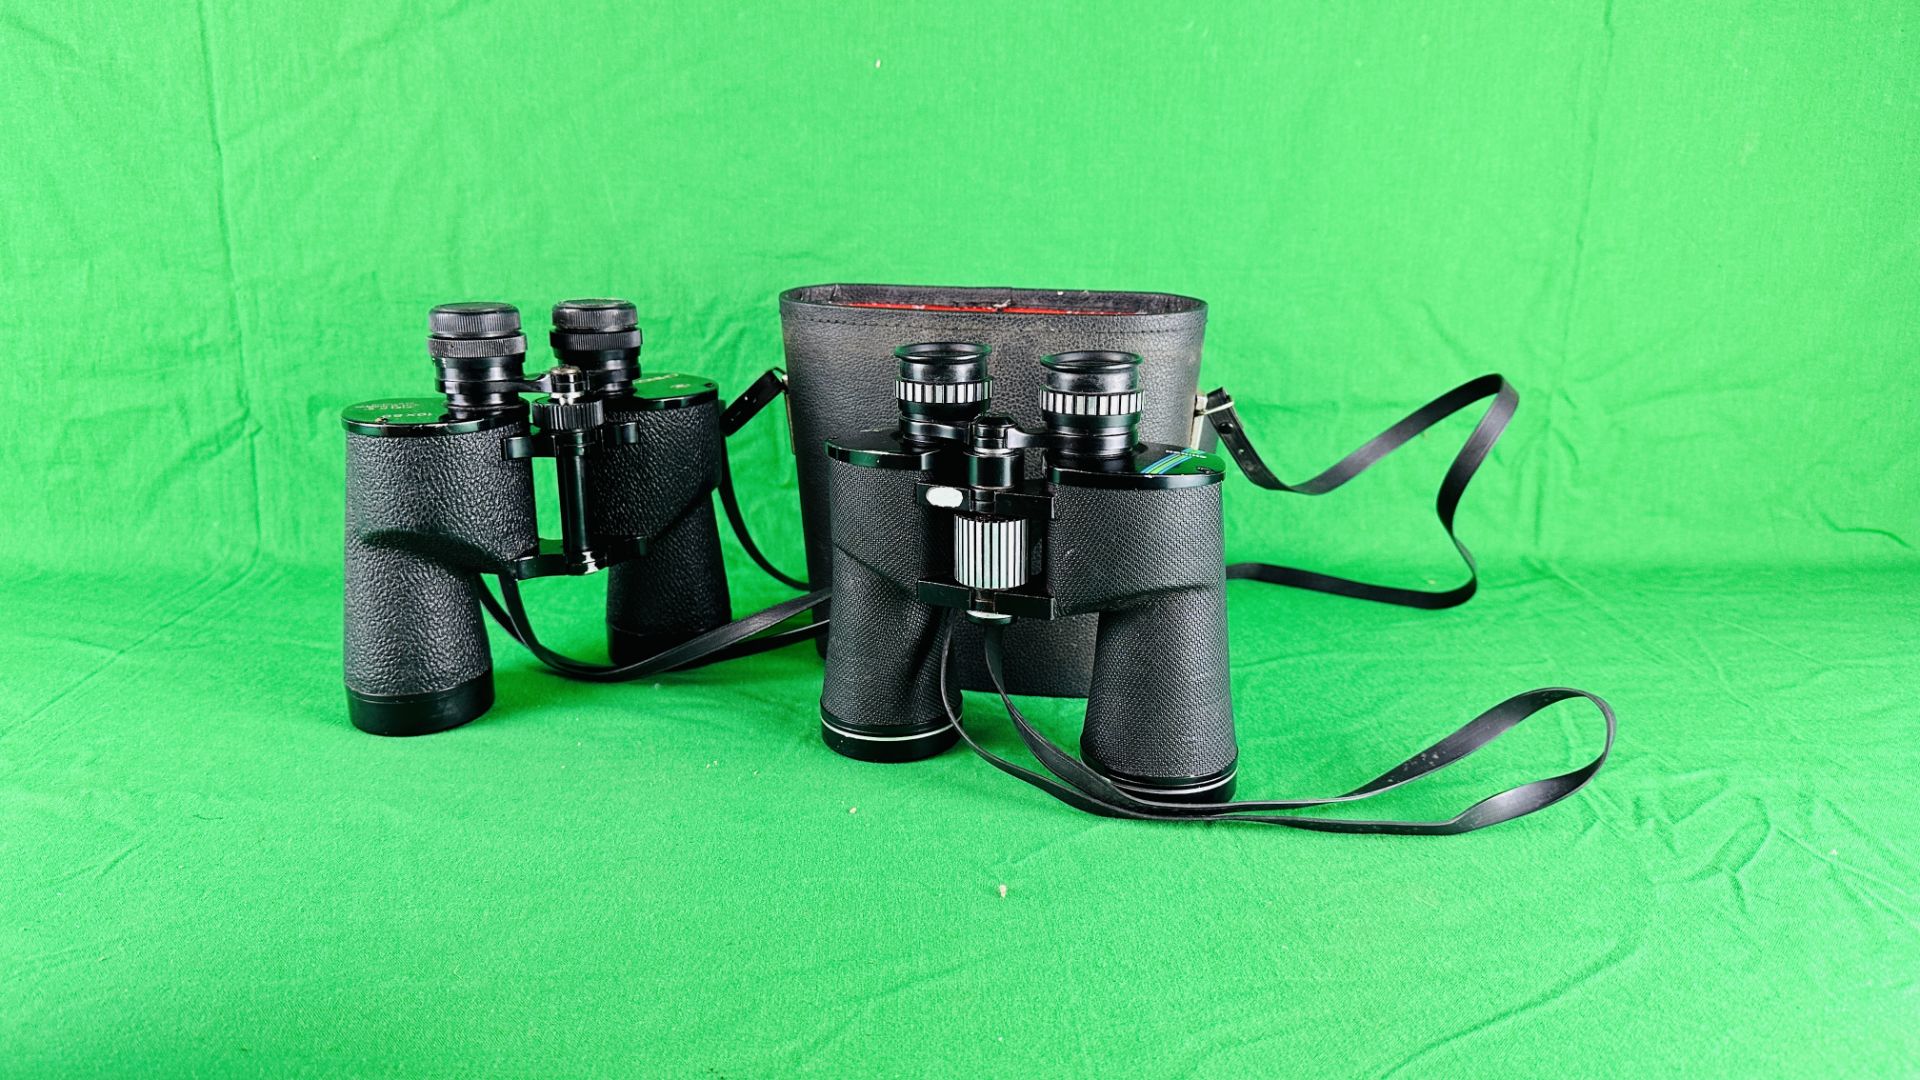 TWO PAIRS OF BINOCULARS INCLUDING CHINON 10X50 FIELD AND CHINON 6X50 - Image 10 of 10